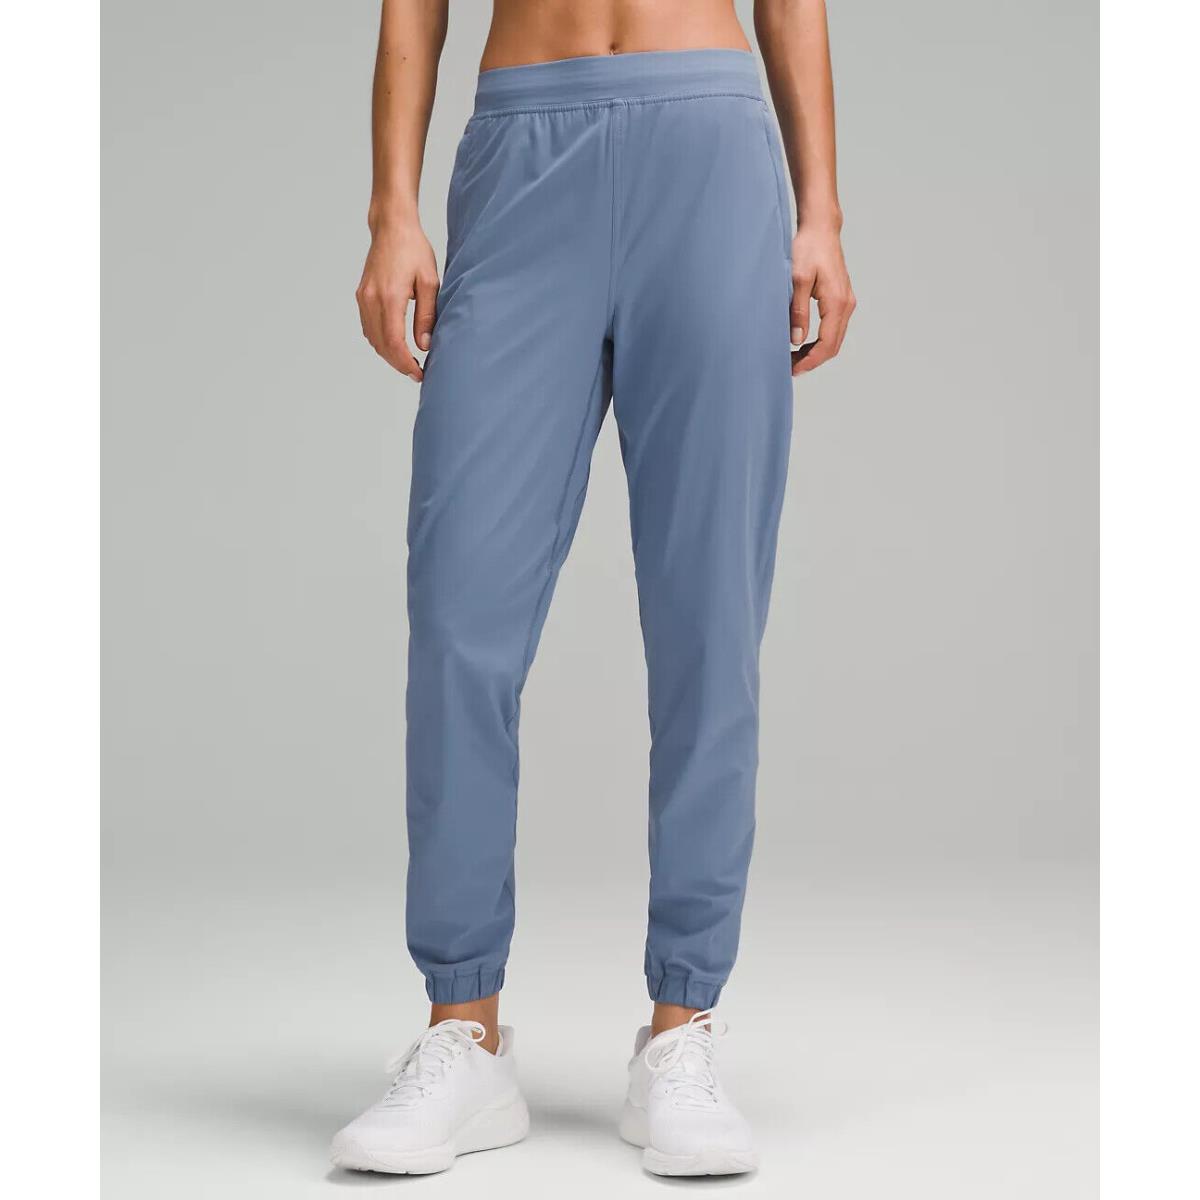 Lululemon Adapted State High Rise Jogger - Retail Oasis Blue